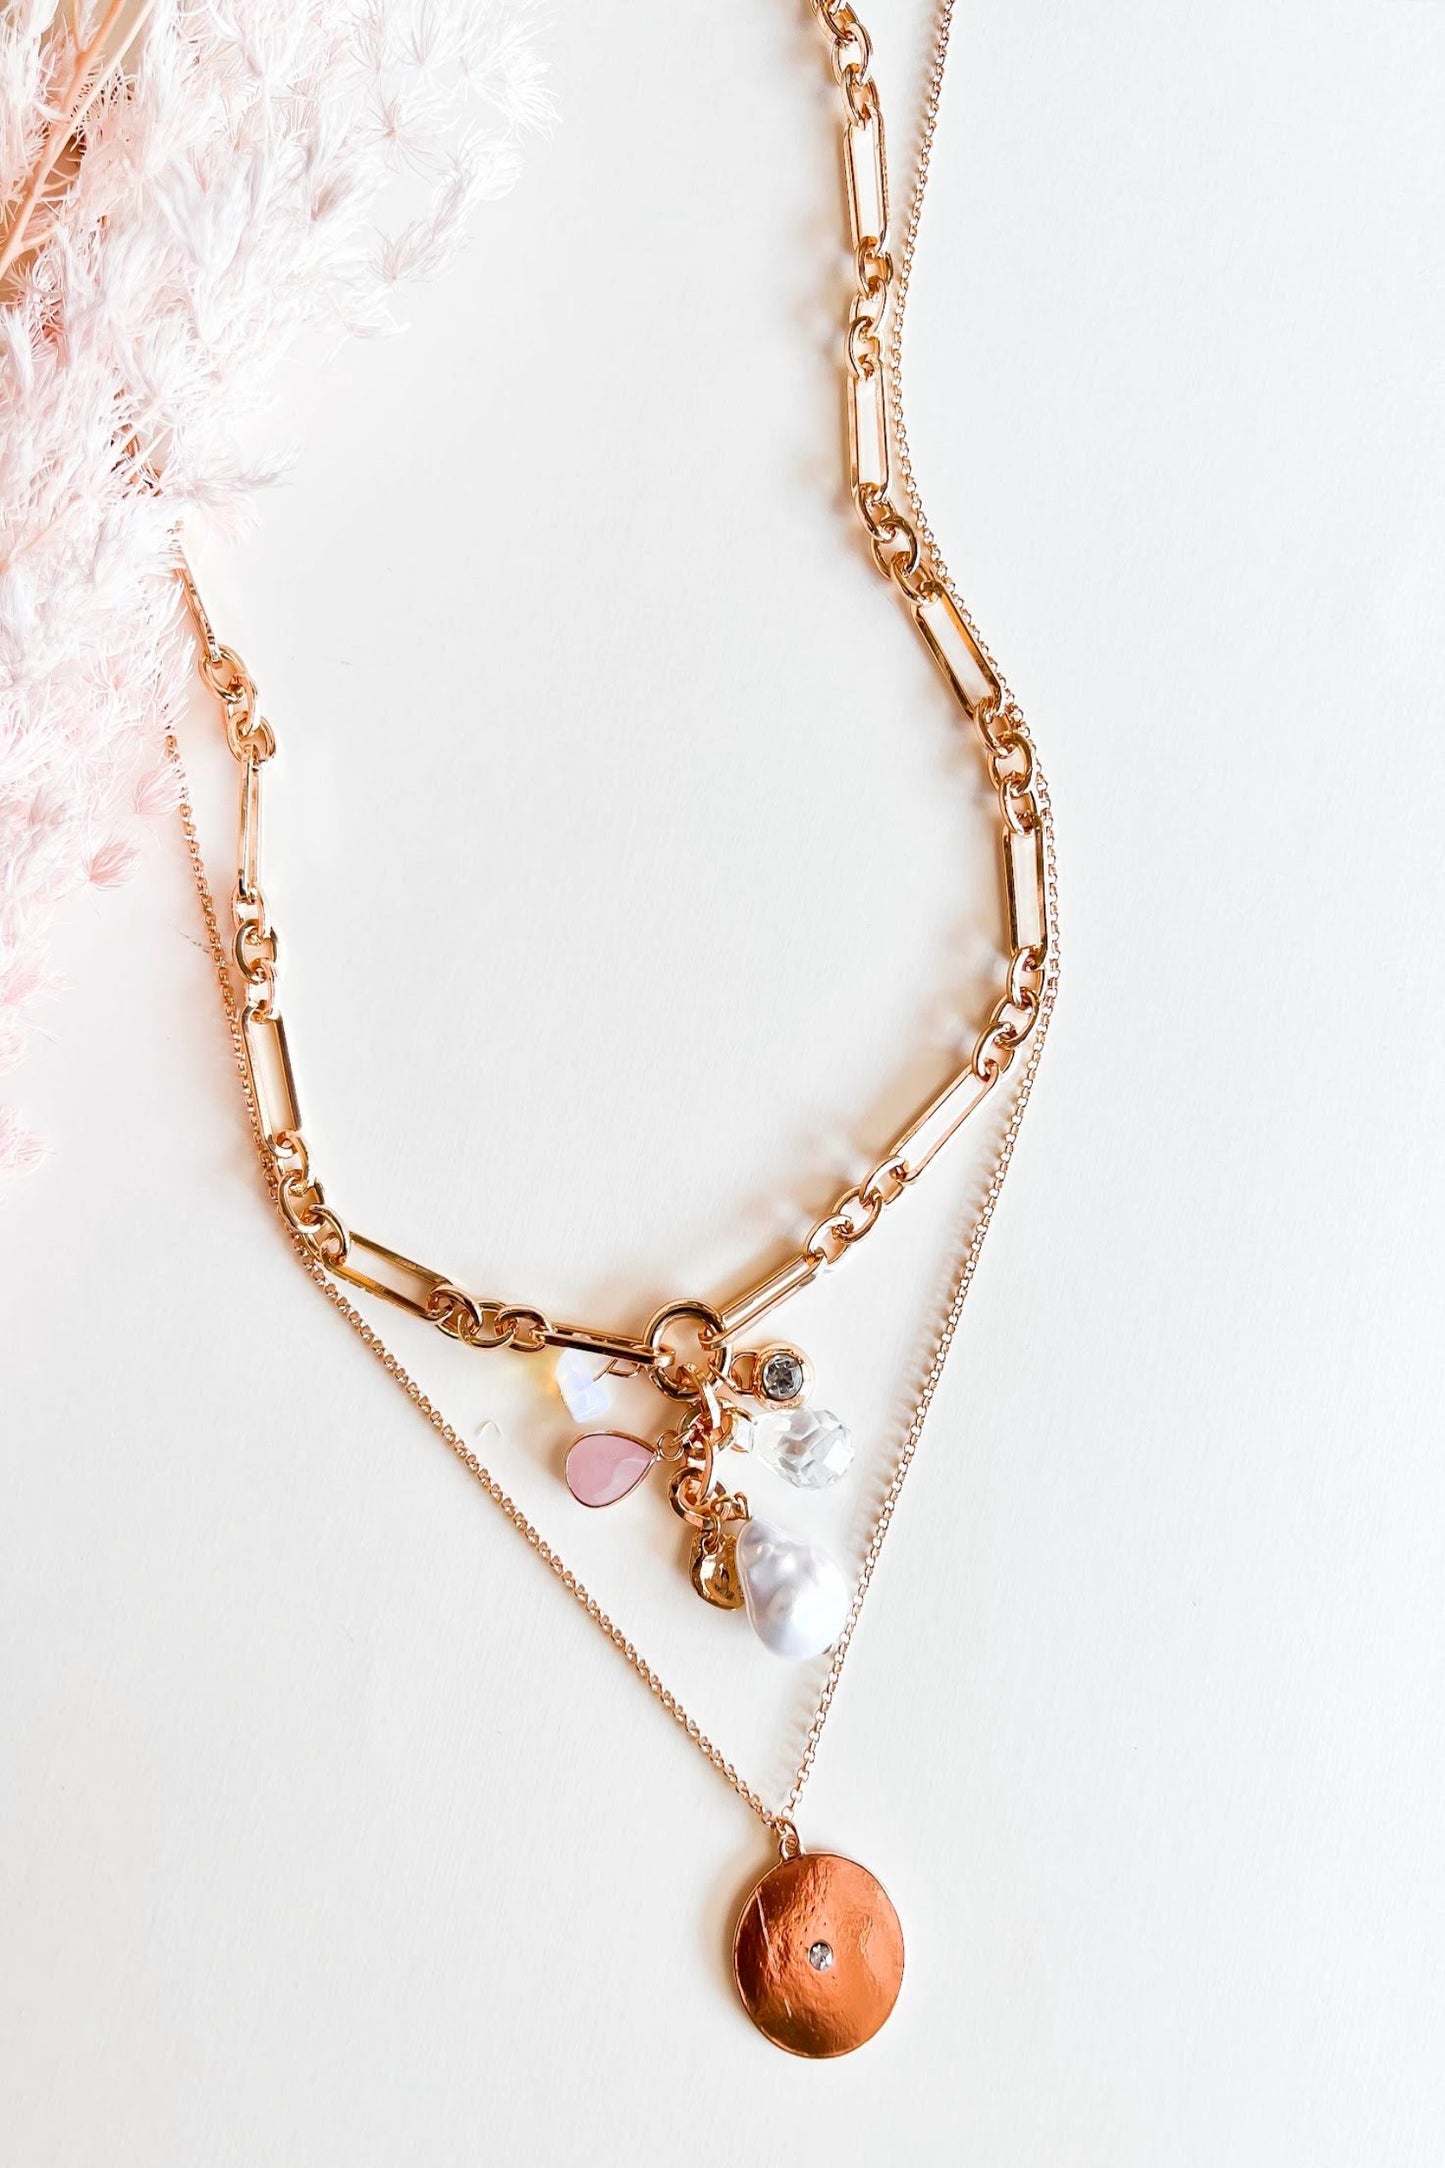 Load image into Gallery viewer, Natalie Layered Charm Necklace | Gold Chains with Pearl Pink and Gold Charms | Two Tiered Long Layering Chain Necklace
